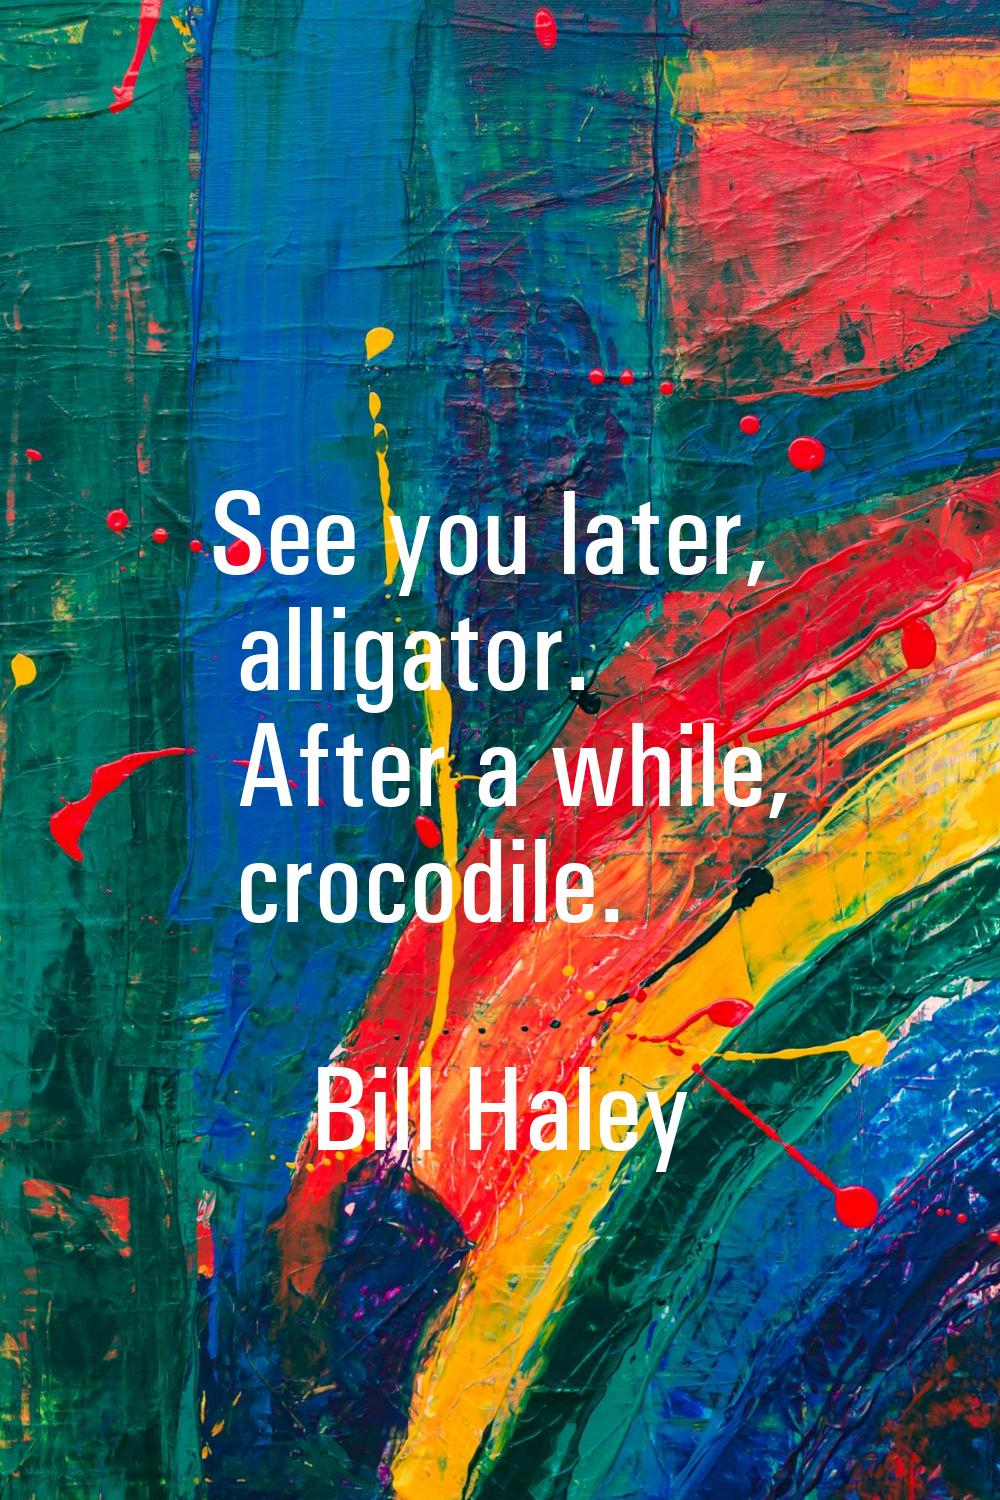 See you later, alligator. After a while, crocodile.